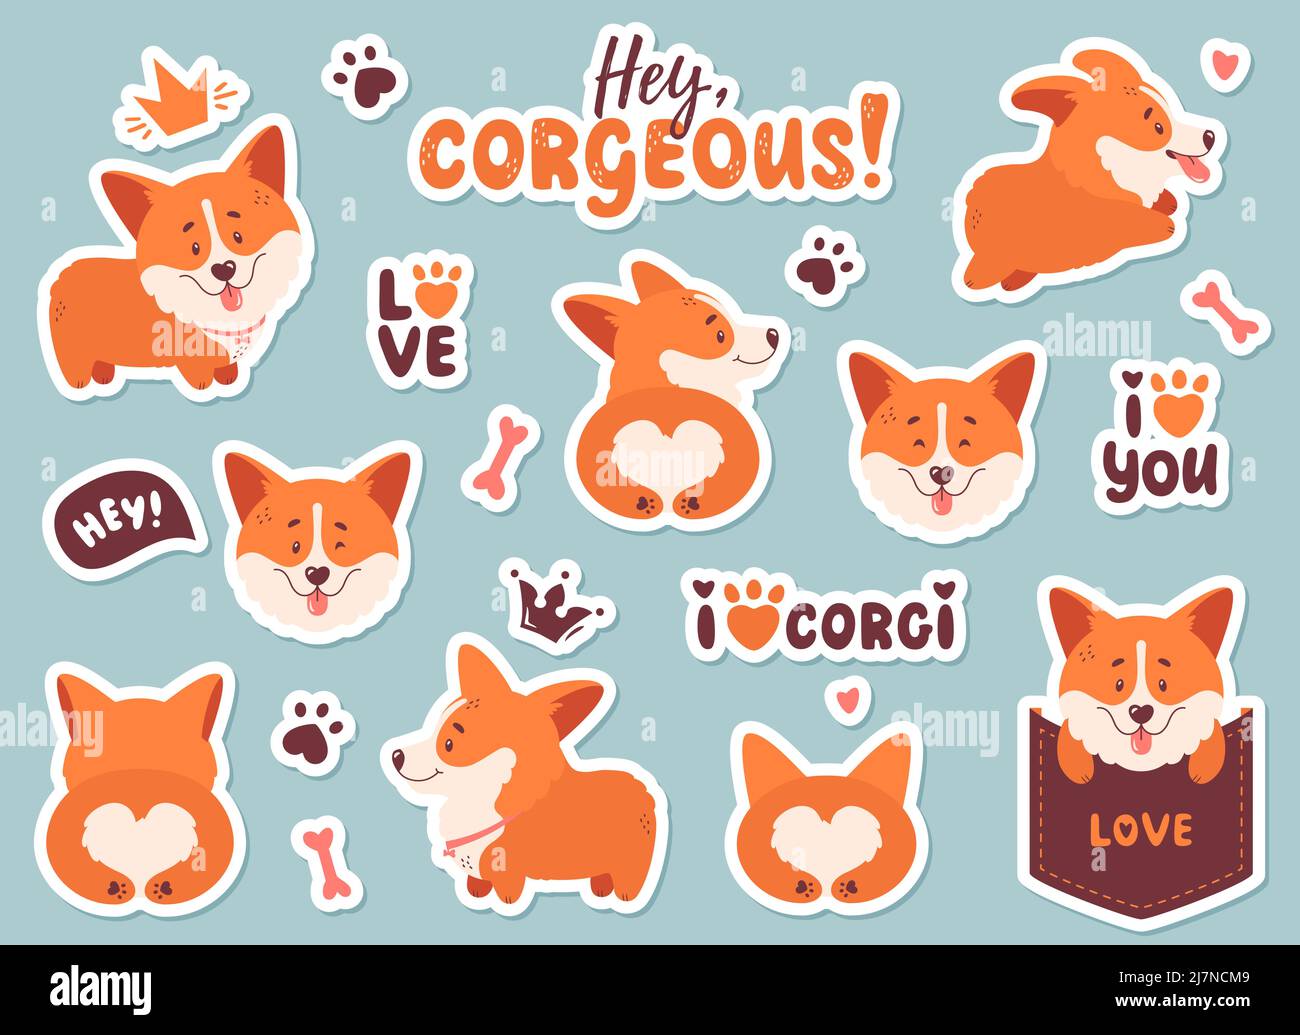 Corgi sticker set. Funny puppies, hand drawn lettering and other elements - bone, crown, footprint. Different poses, back view of cute butt. Vector. Stock Vector